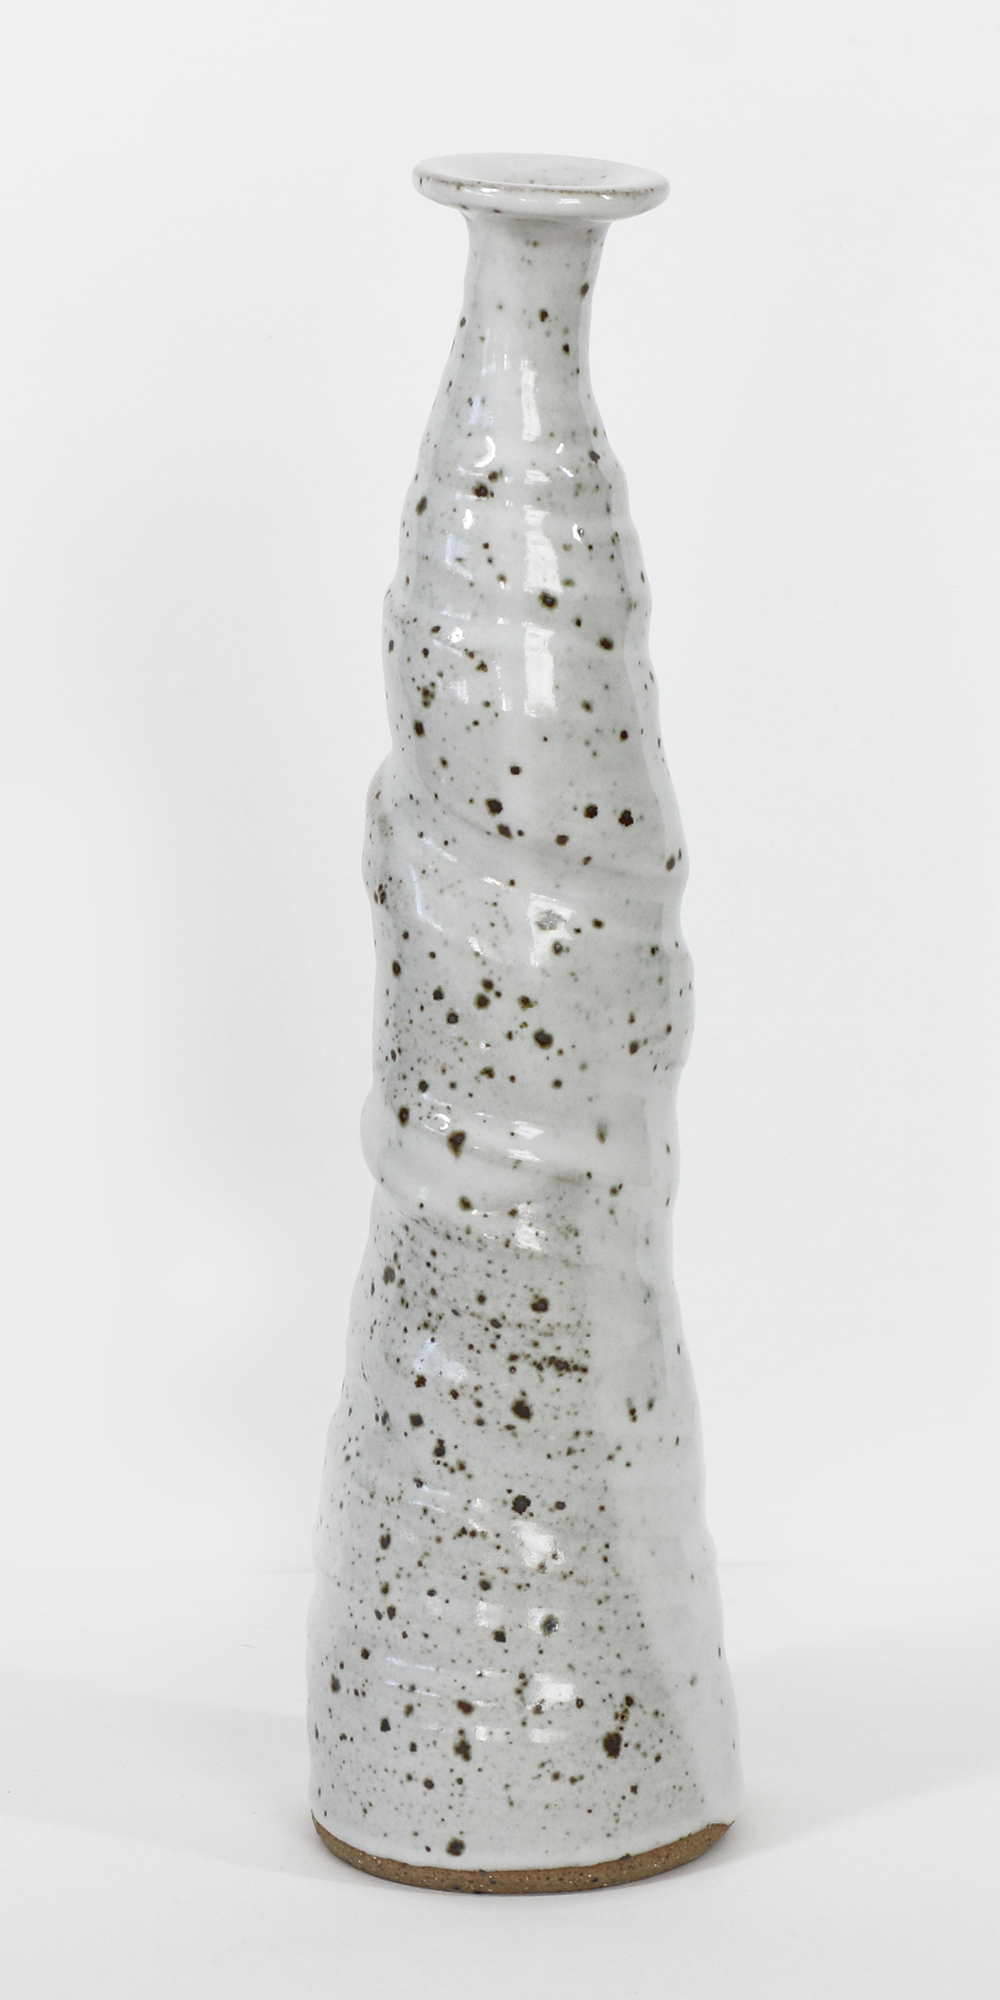 Happiness Vase #5 Ceramic Jacqueline Kampen The Happiness Project